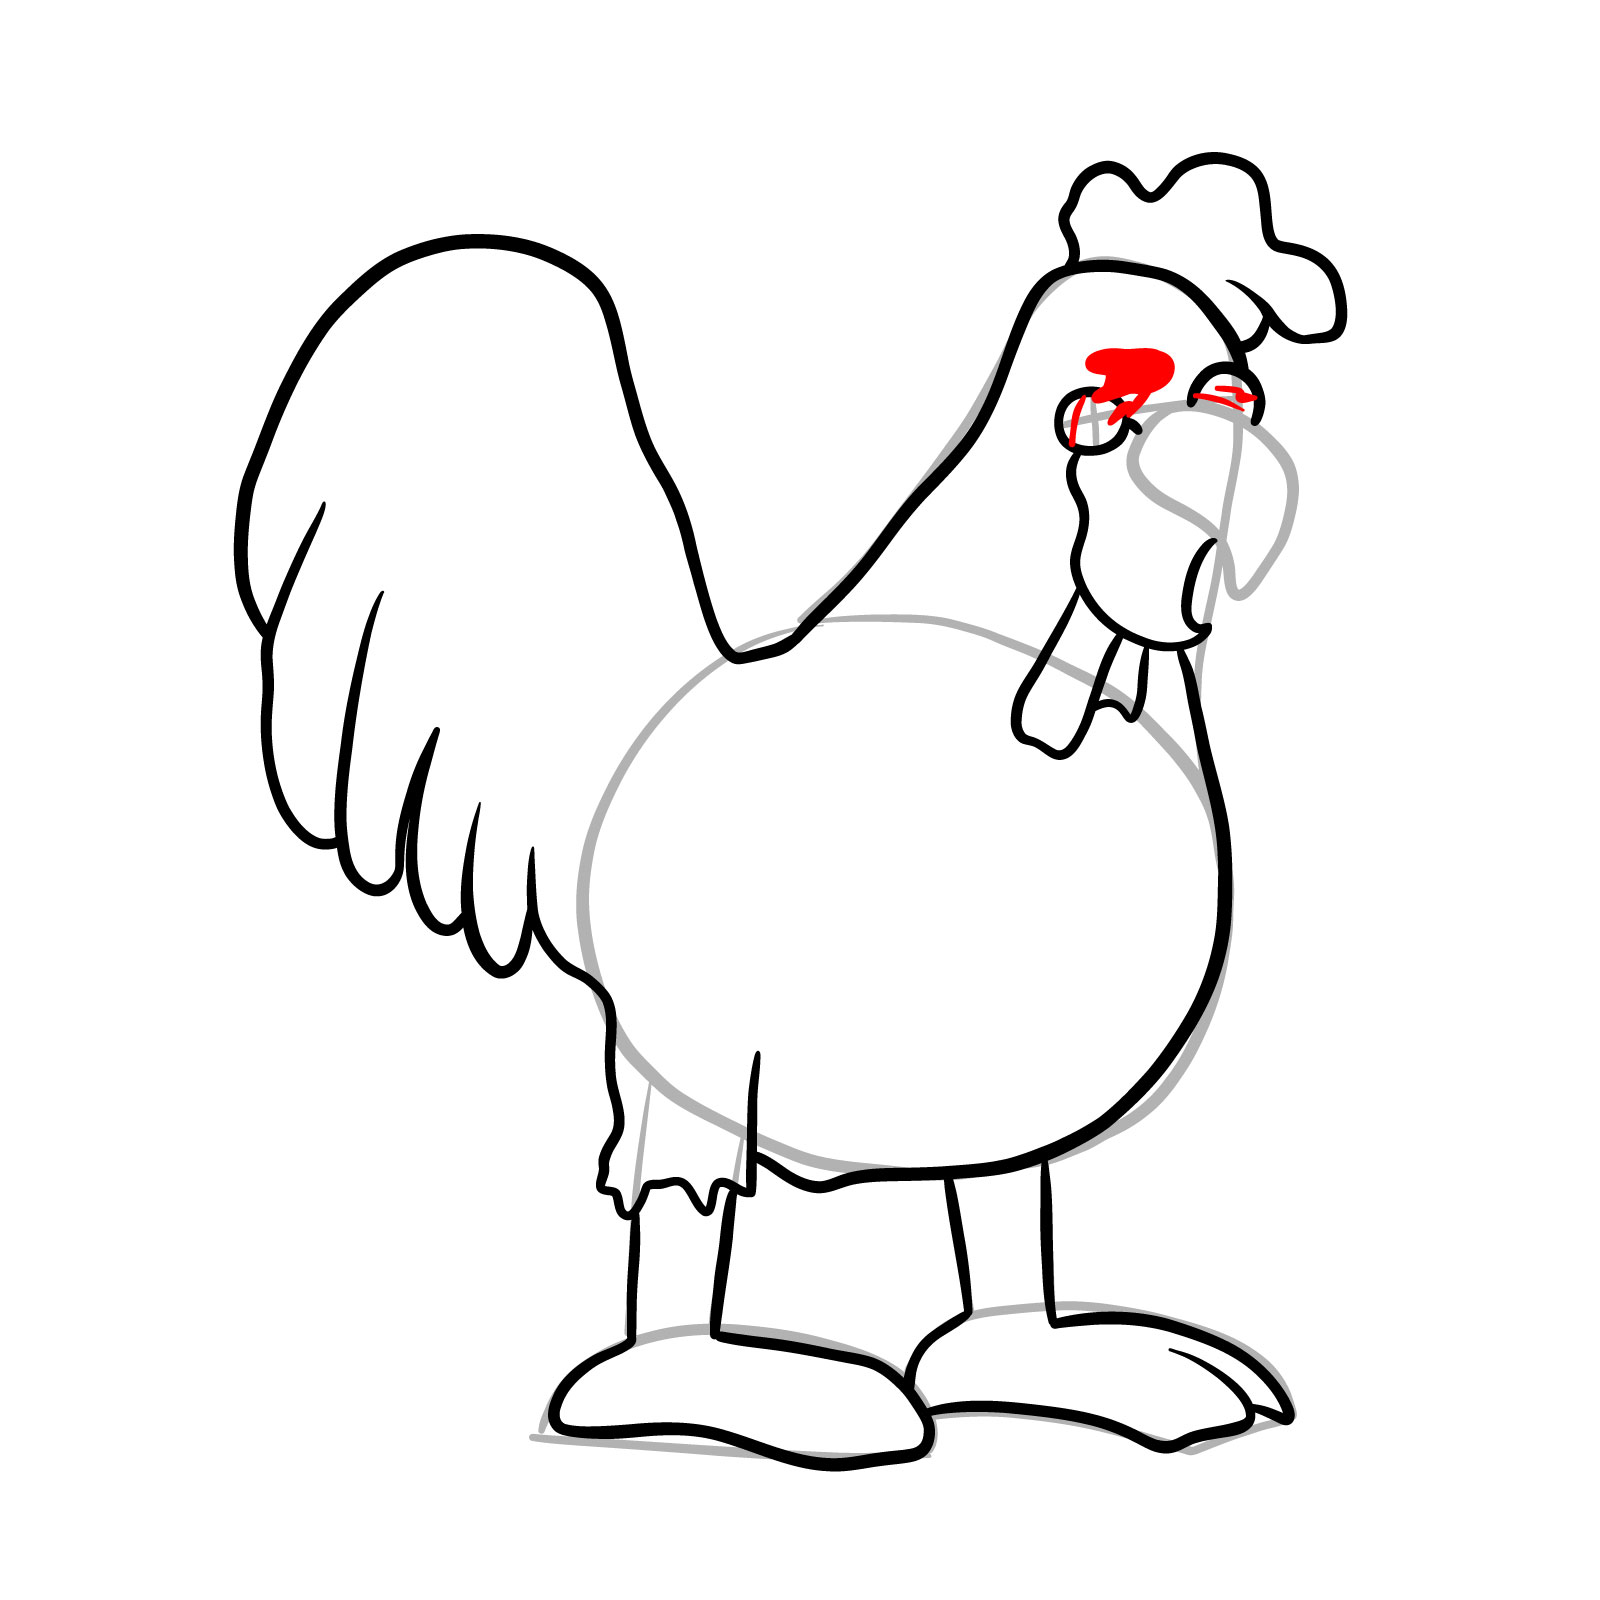 How to draw Corrupted Ernie the Chicken - step 16